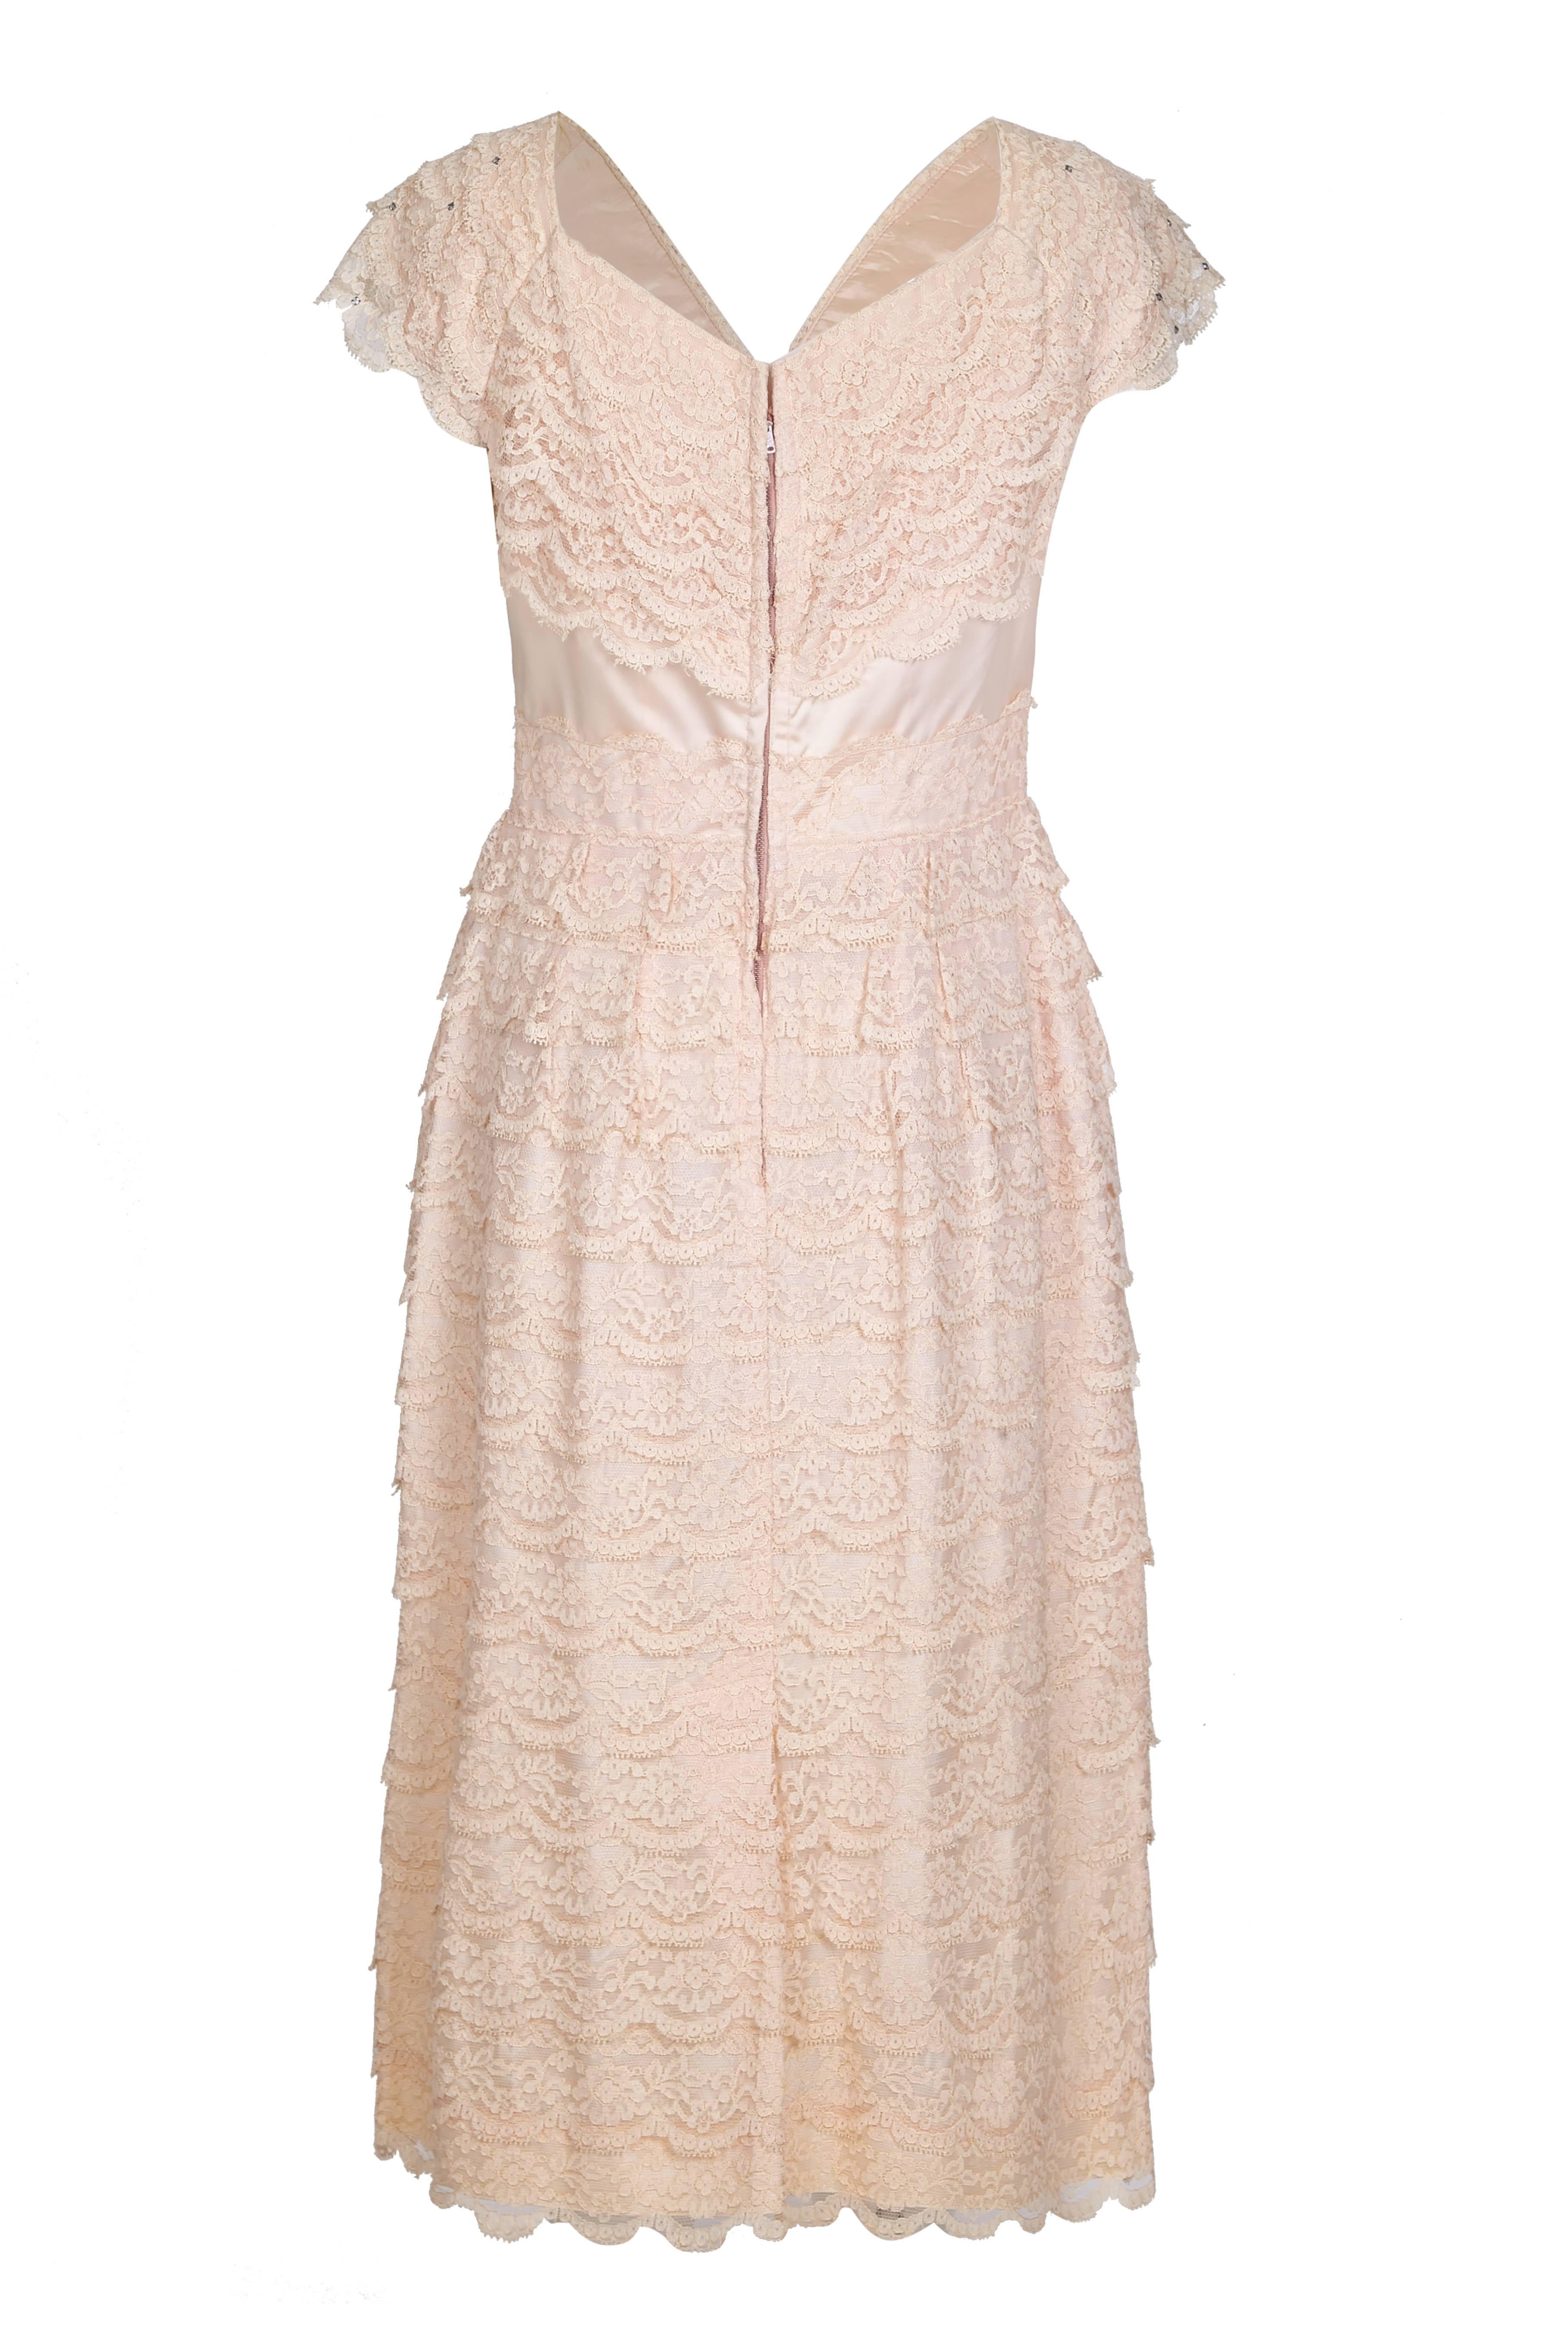 This charming vintage 1950s pale pink tiered lace dress is gamine, playful, and in lovely vintage condition. Designed to flatter an hourglass figure, the dress has a simple line fitting snugly at the waist and with generous give in the hips and